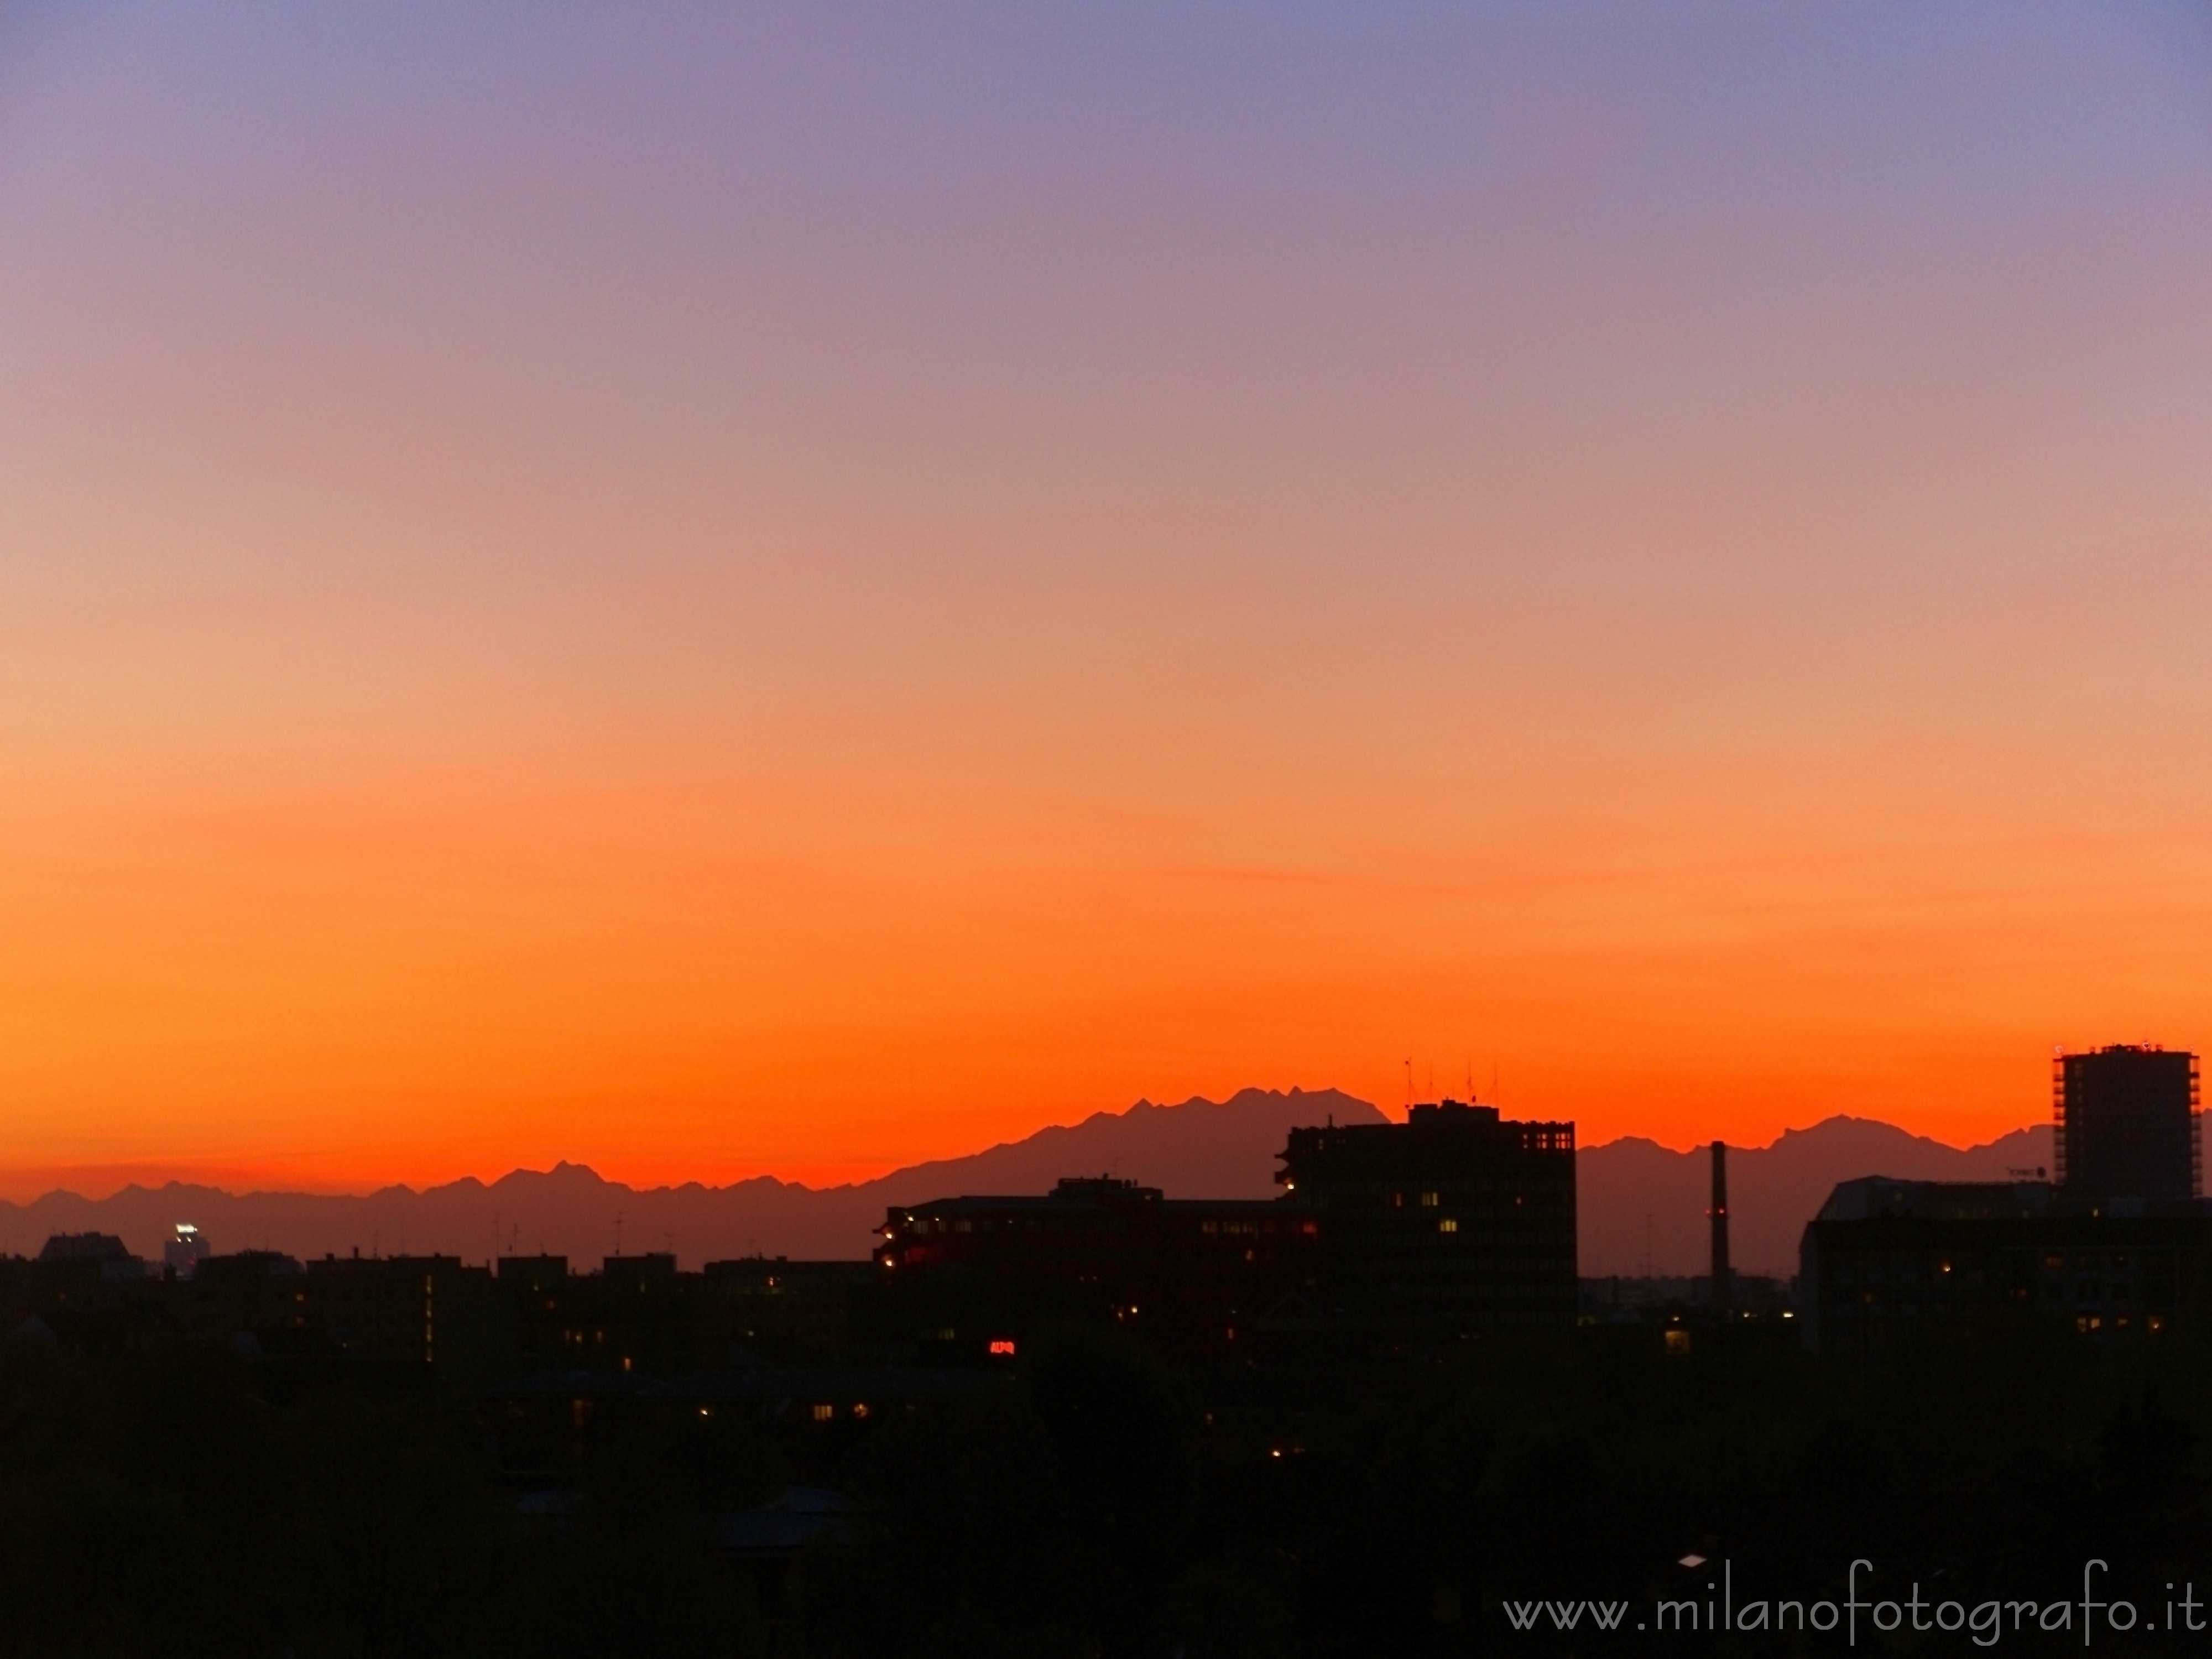 Milan (Italy): Sunset with Mount Rosa in the background - Milan (Italy)